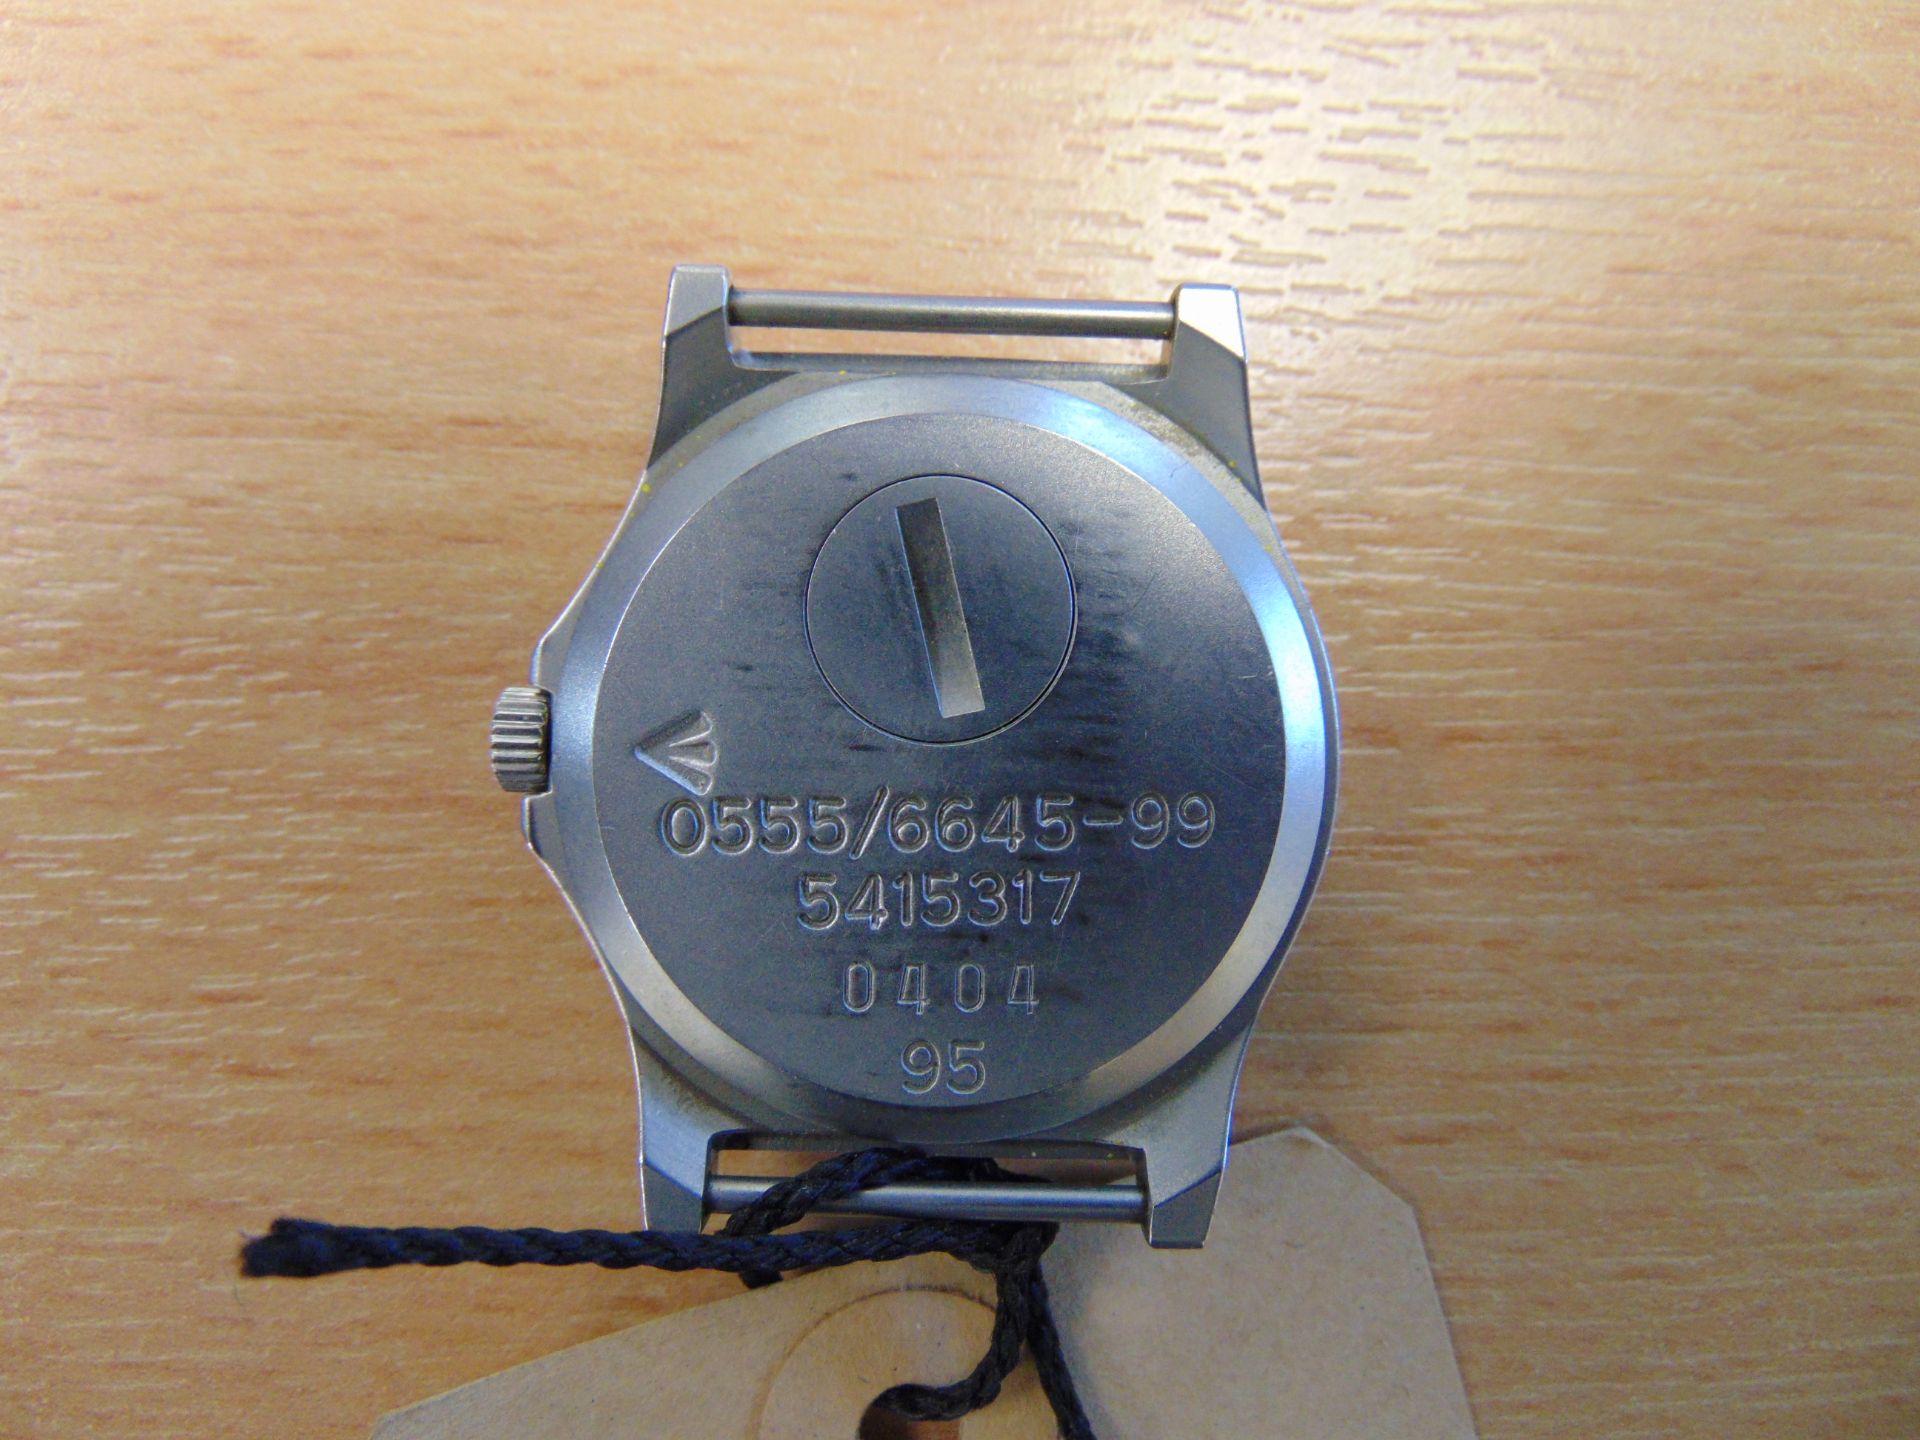 CWC (Cabot Watch Co Switzerland) 0555 Royal Marines / Navy Service Watch, Nato Marks, Date 1995 - Image 3 of 4